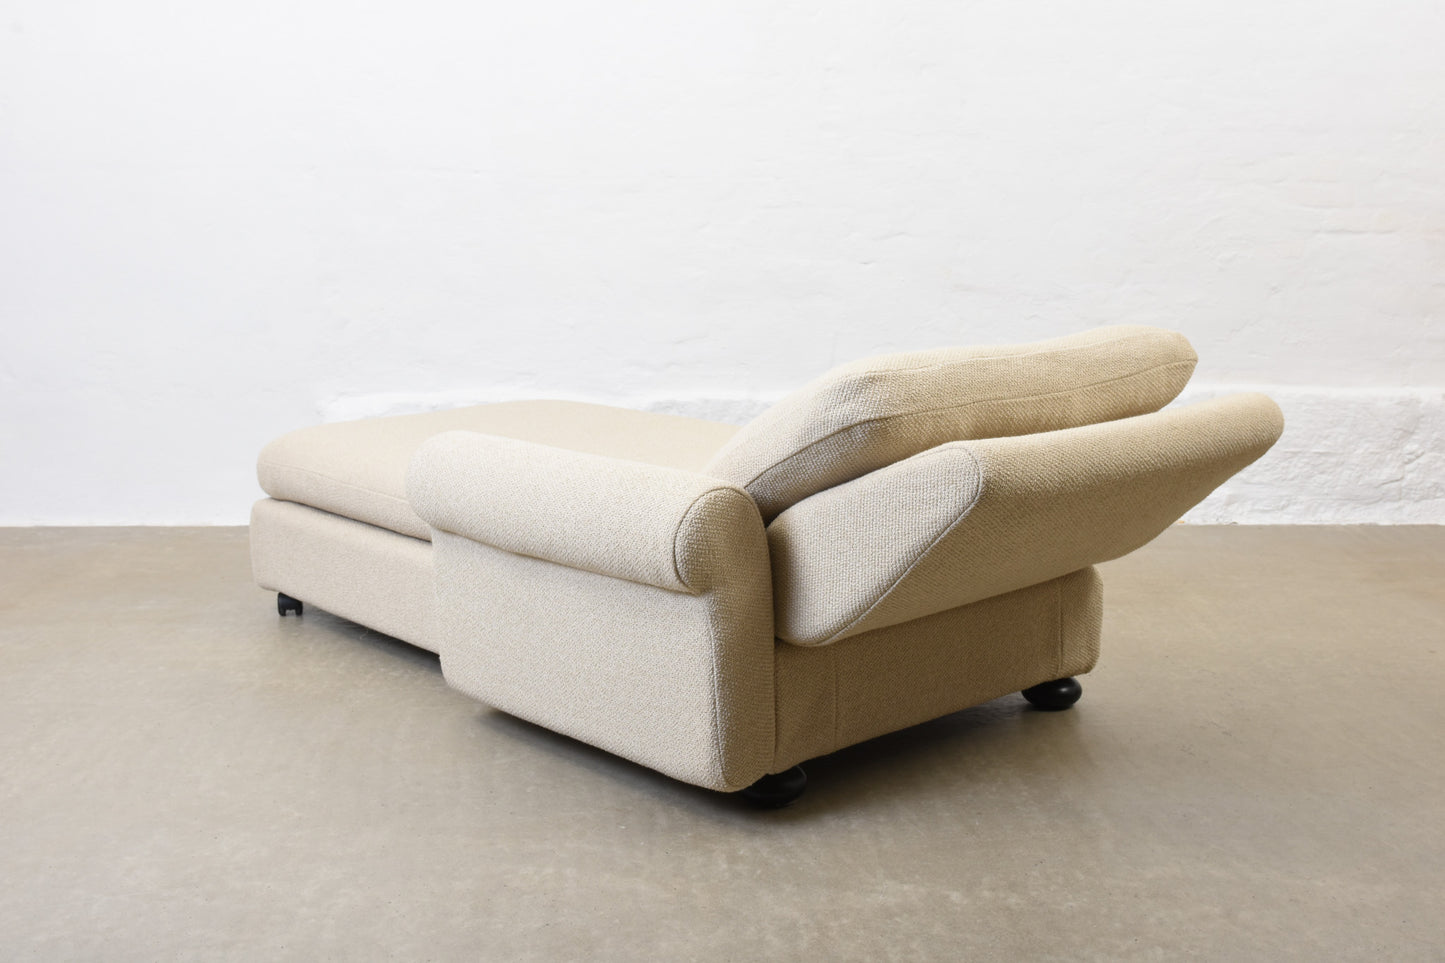 Newly reupholstered: 1980s reclining divan by Dux